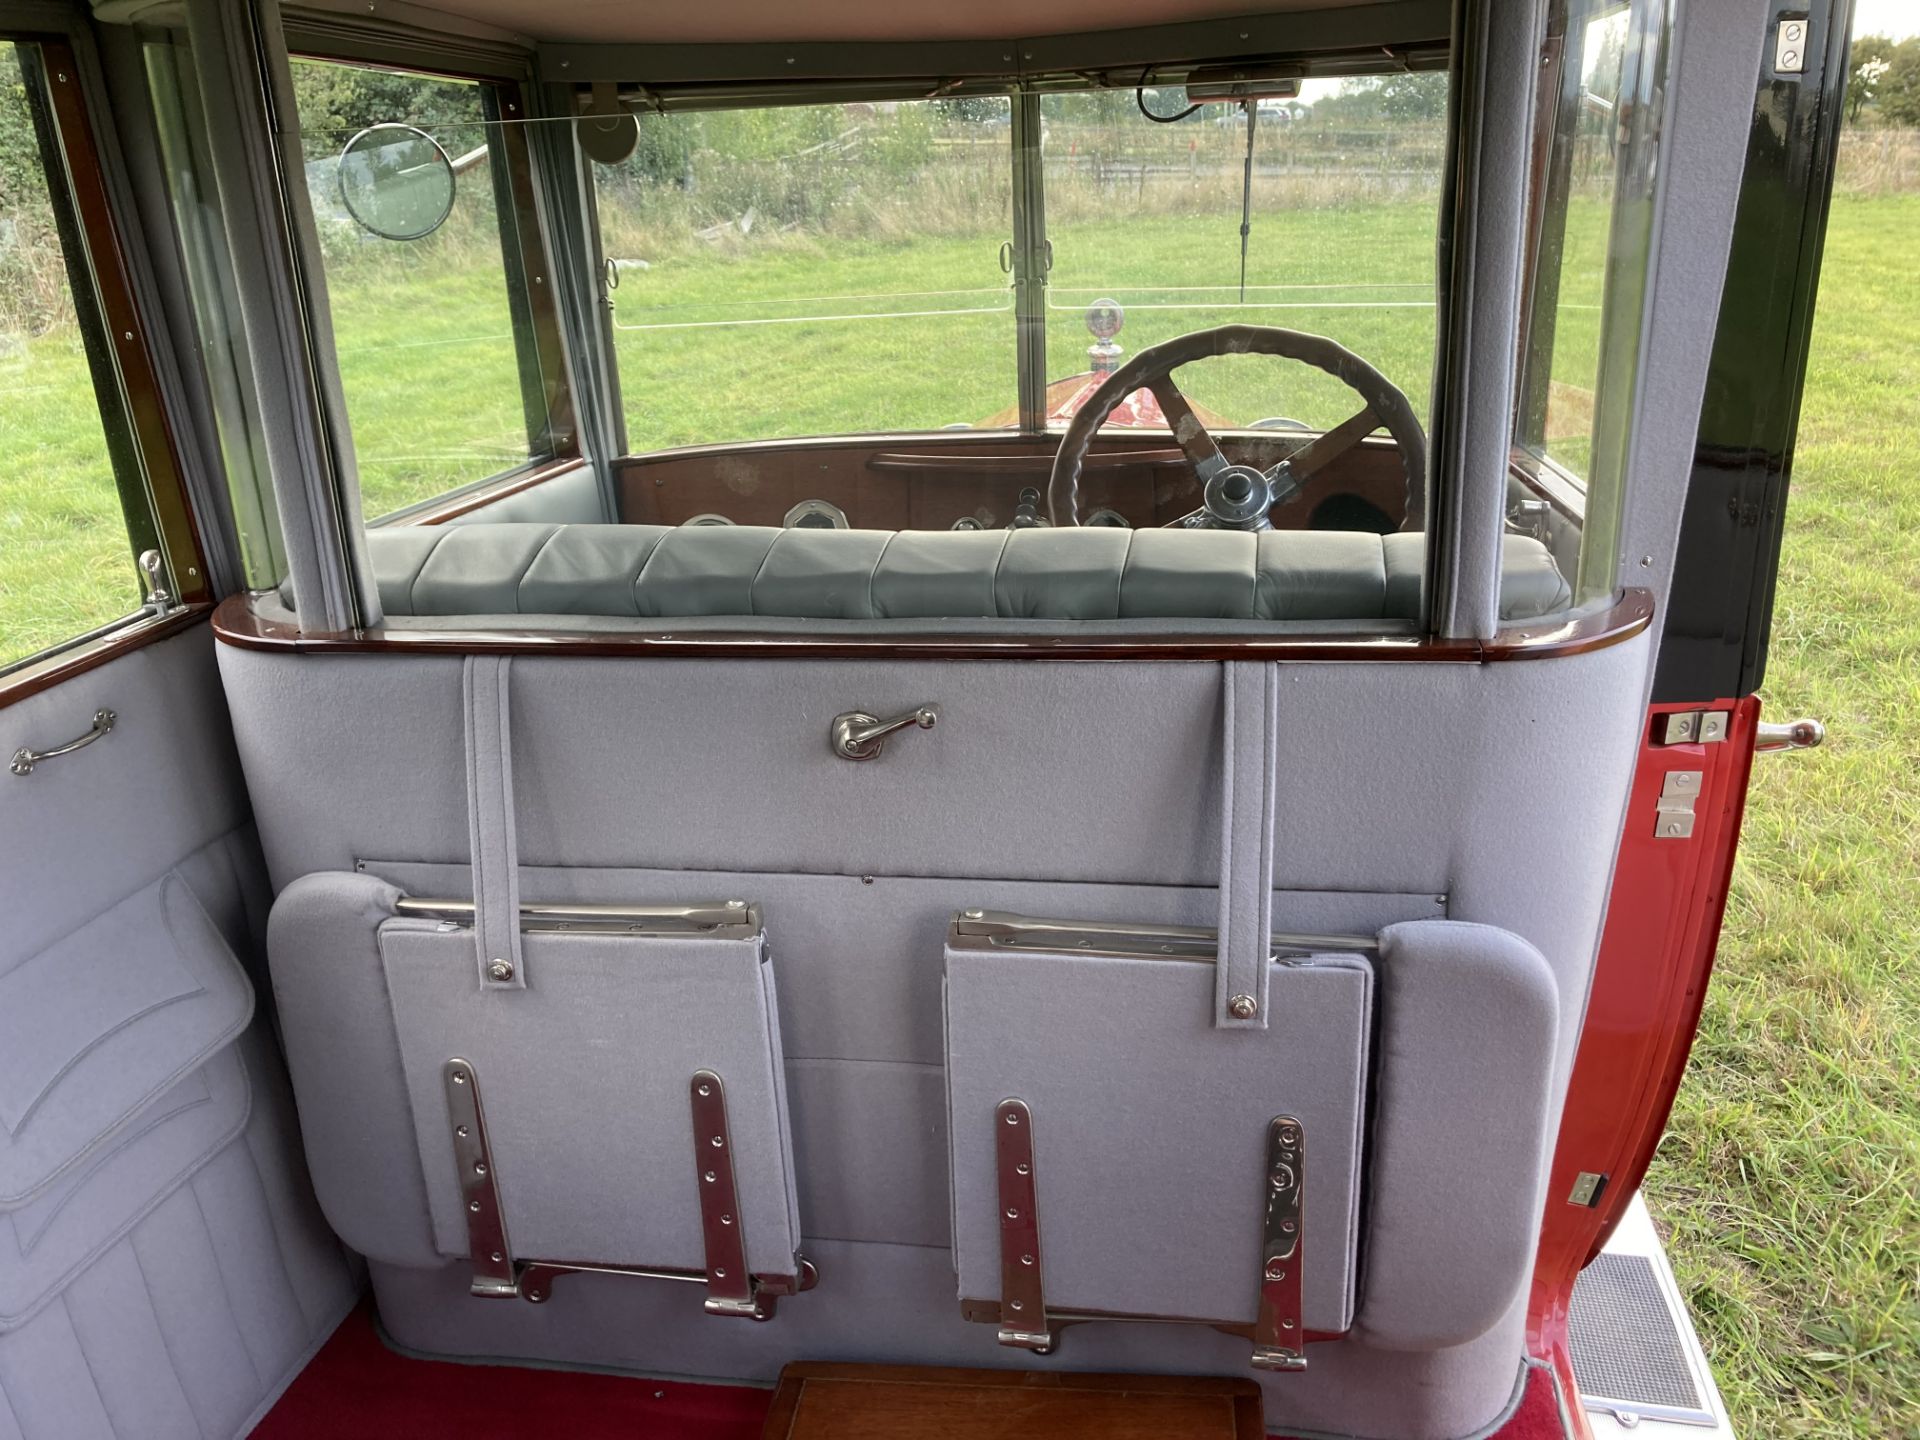 HISTORIC VEHICLE - 1924 BUICK McLAUGHLIN LIMOUSINE - Petrol - Red/Black - Blue/grey cloth interior. - Image 22 of 30